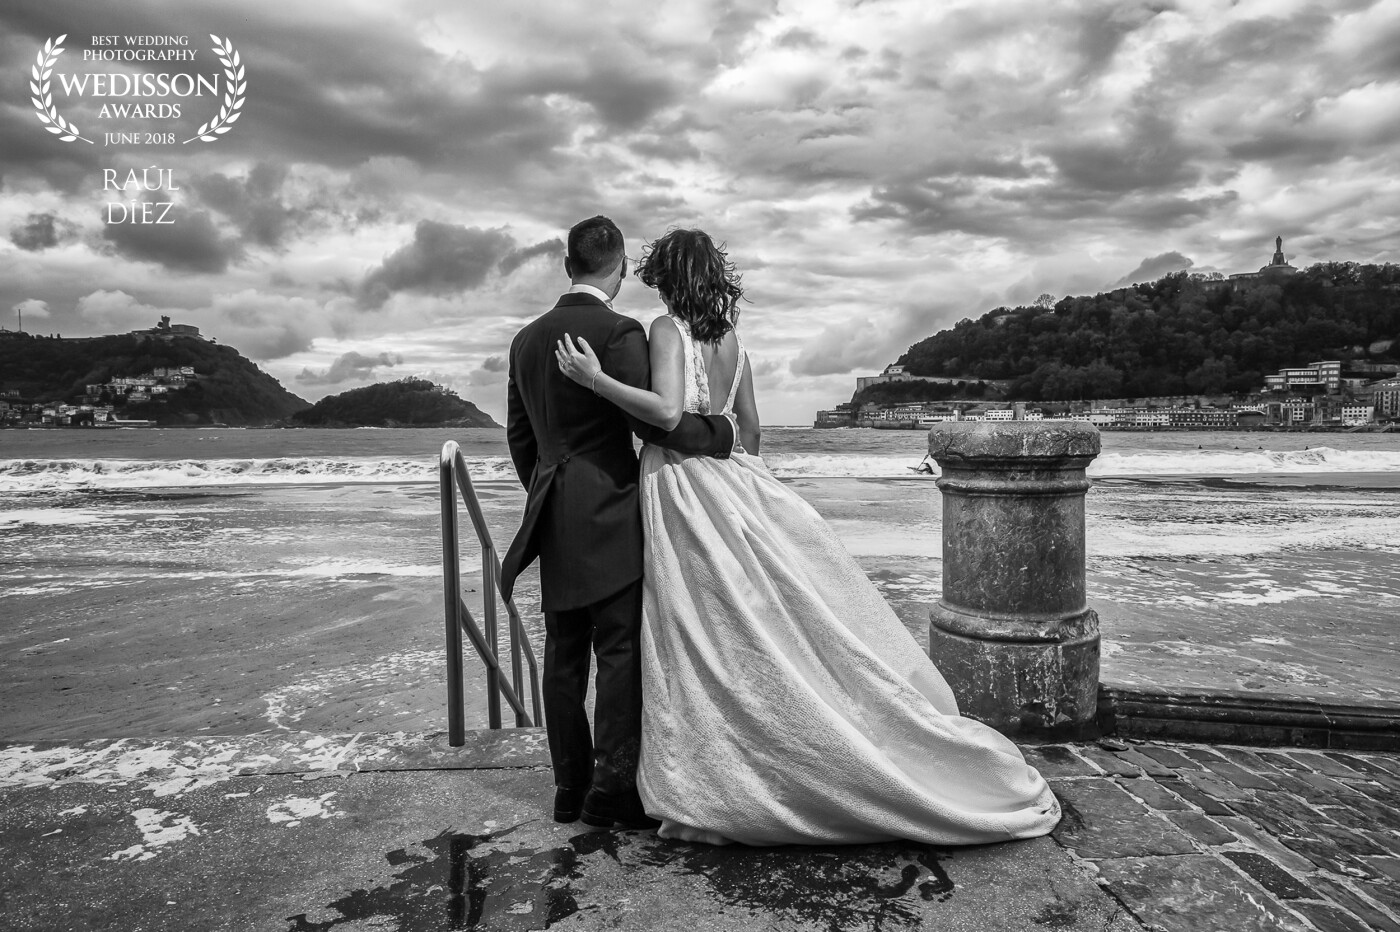 This image was taken on the beach of La Concha in San Sebastian during a post-wedding session. The cloudy skies threatened storm and were perfect to get a dramatic photo.